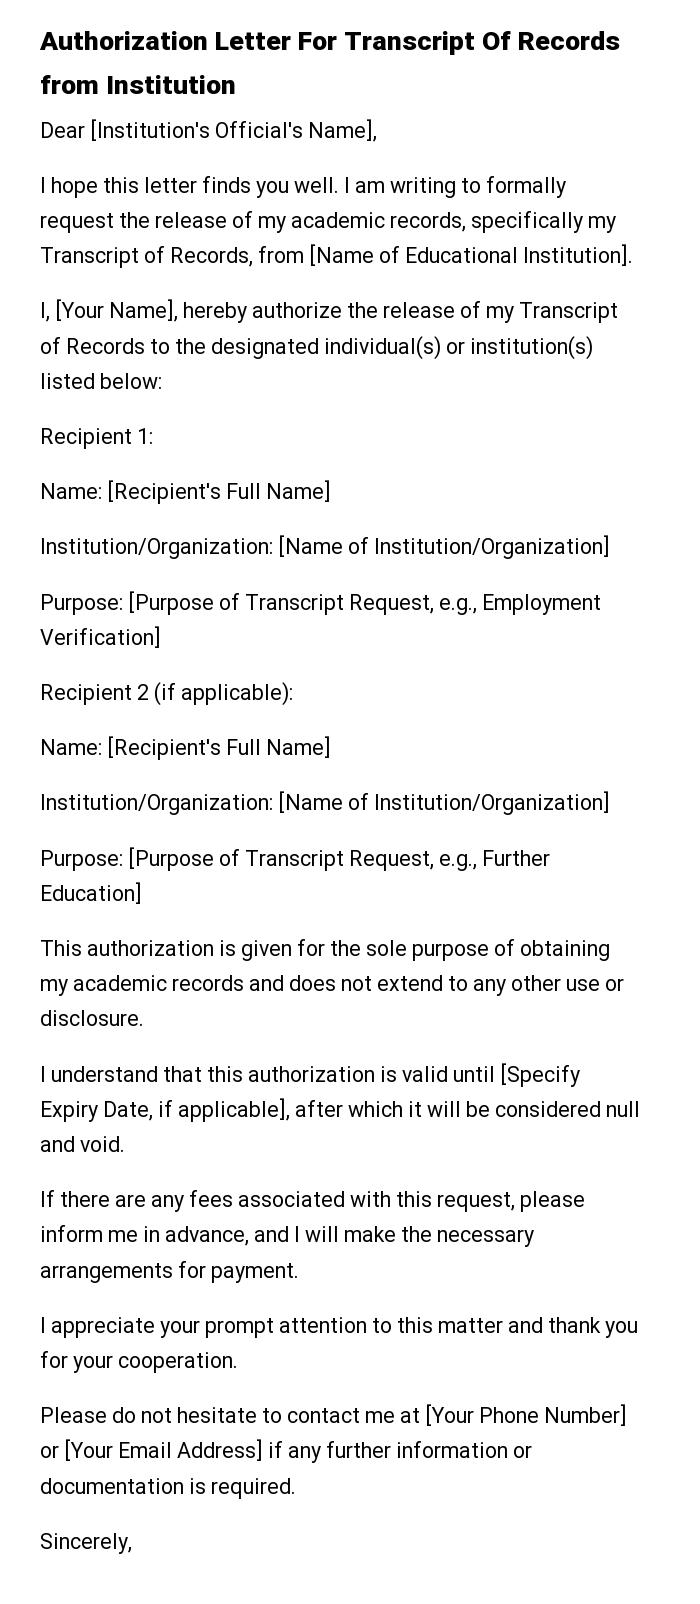 Authorization Letter For Transcript Of Records from Institution